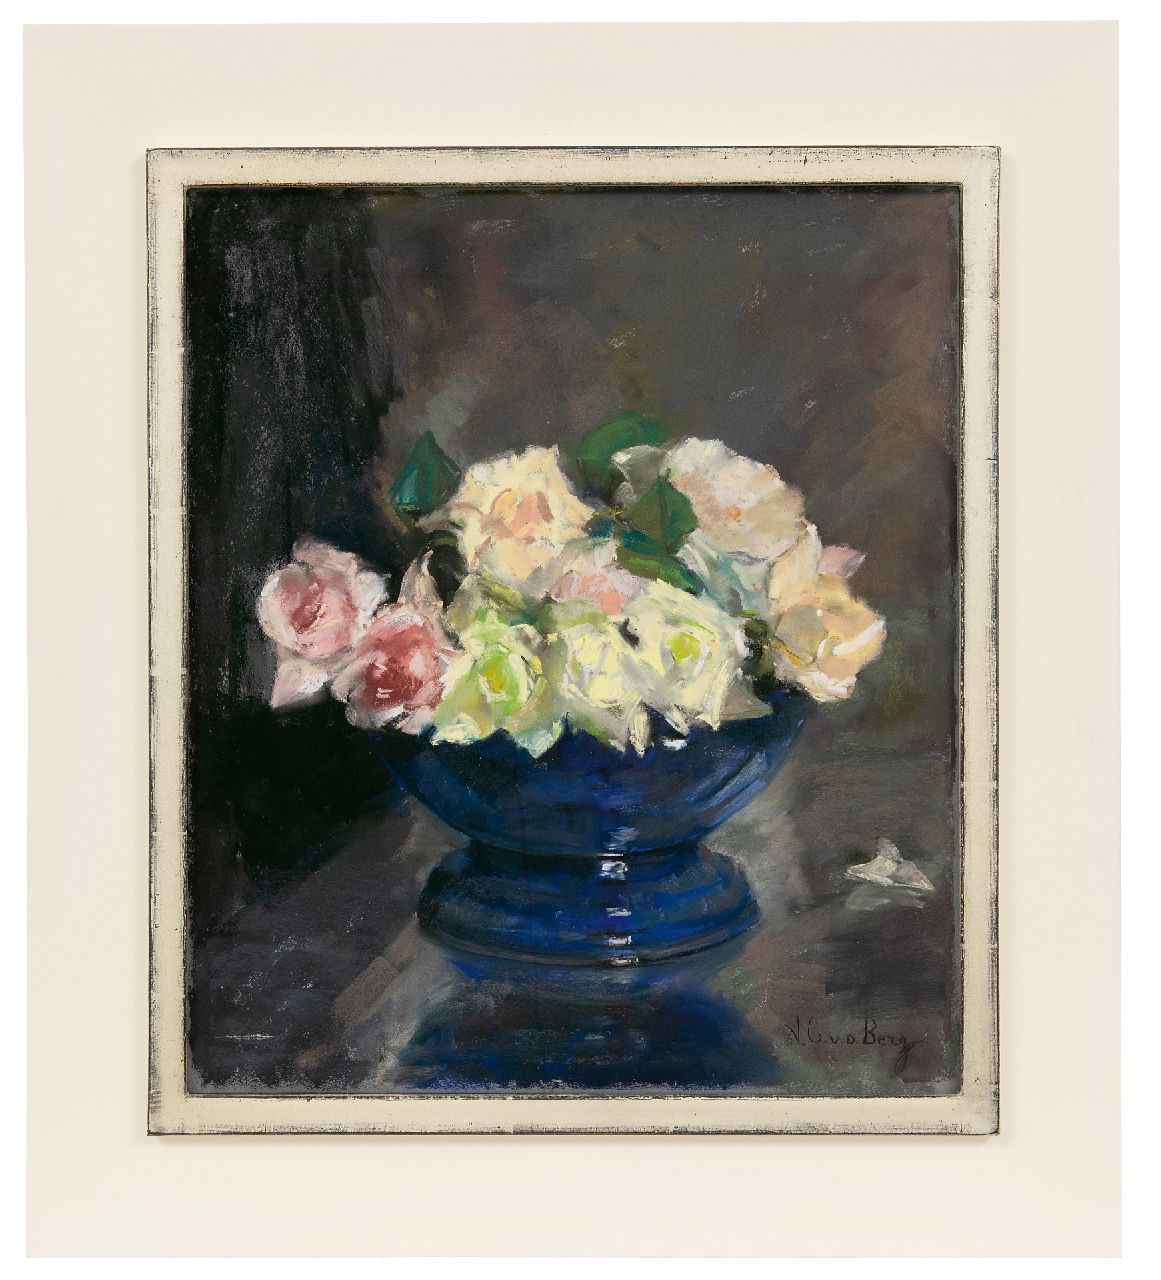 Berg A.C. van den | Anna Carolina 'Ans' van den Berg | Watercolours and drawings offered for sale | Blue bowl with roses, pastel on paper 43.0 x 37.0 cm, signed l.r.